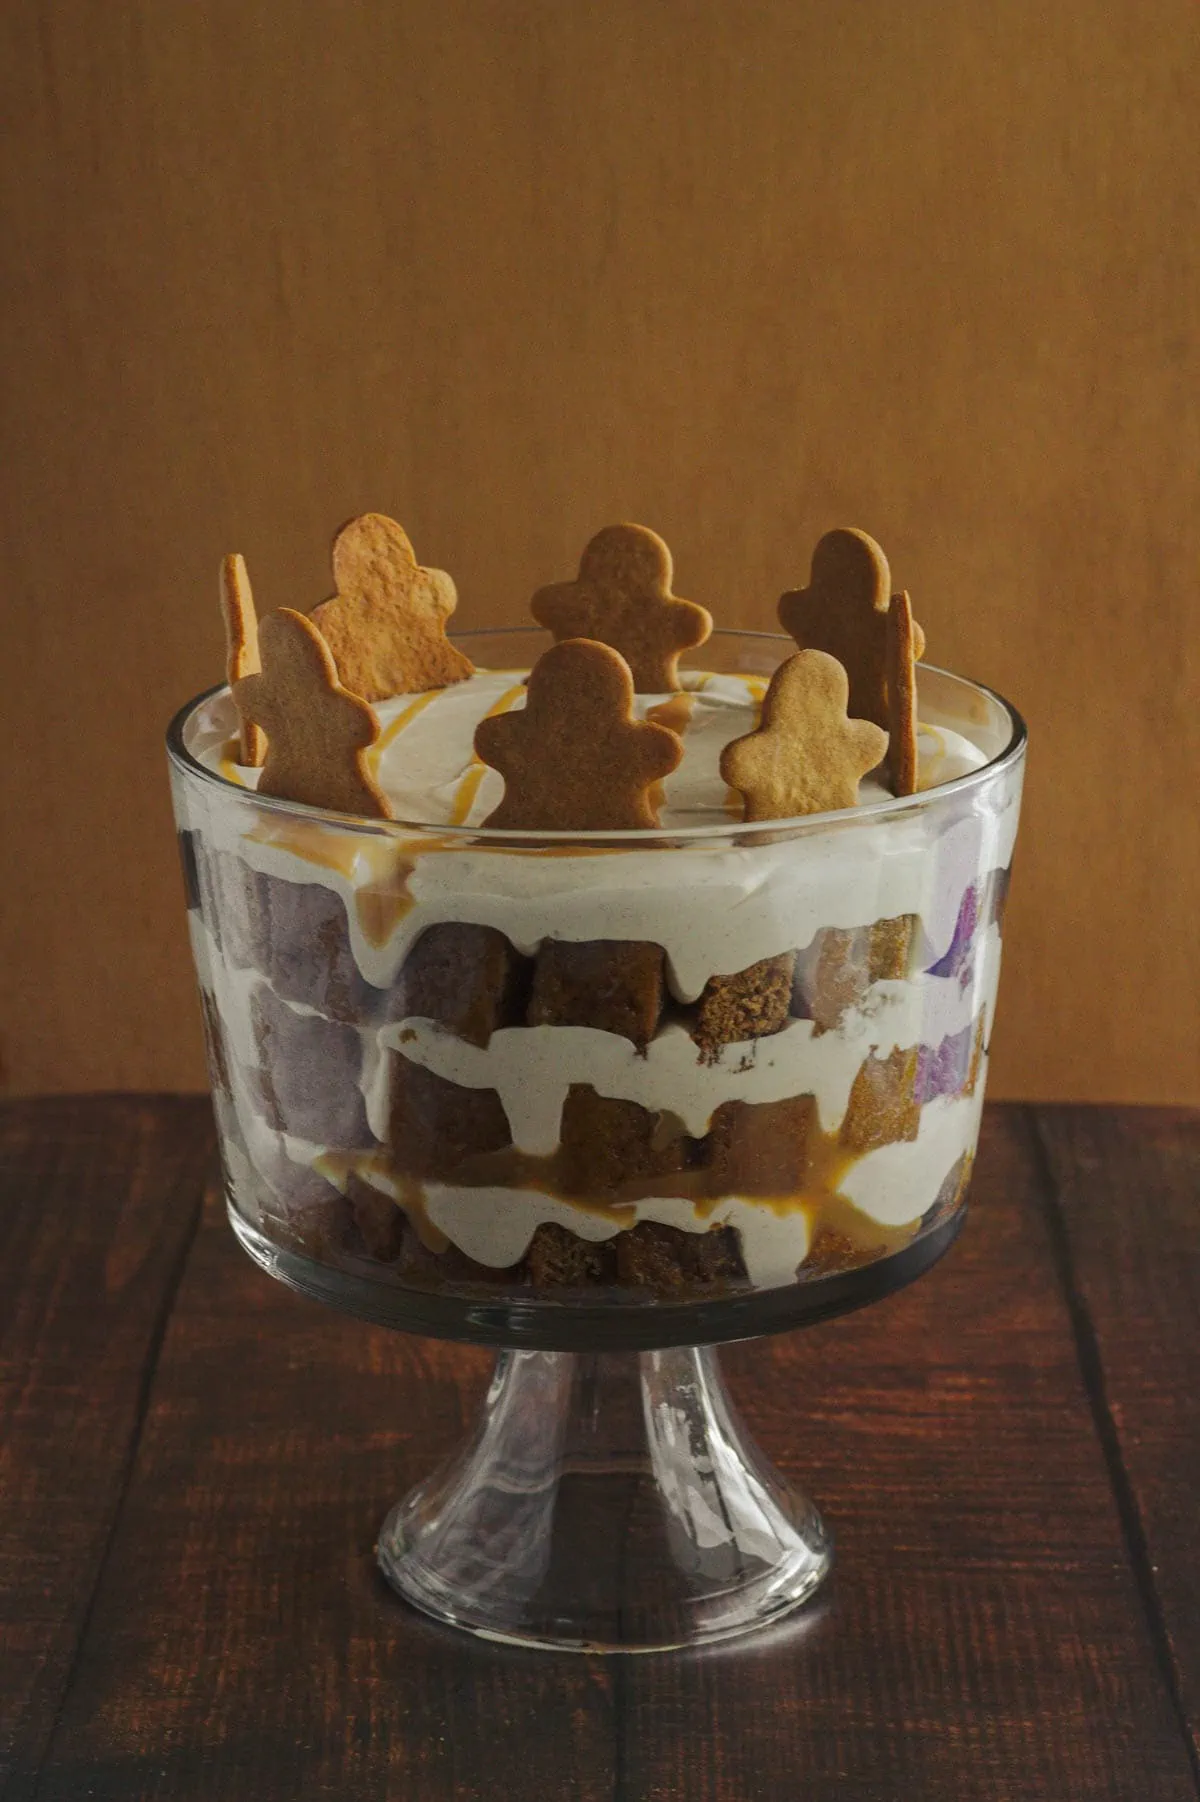 A trifle in a clear trifle dish.  Gingerbread men decorate the tip of the trifle.